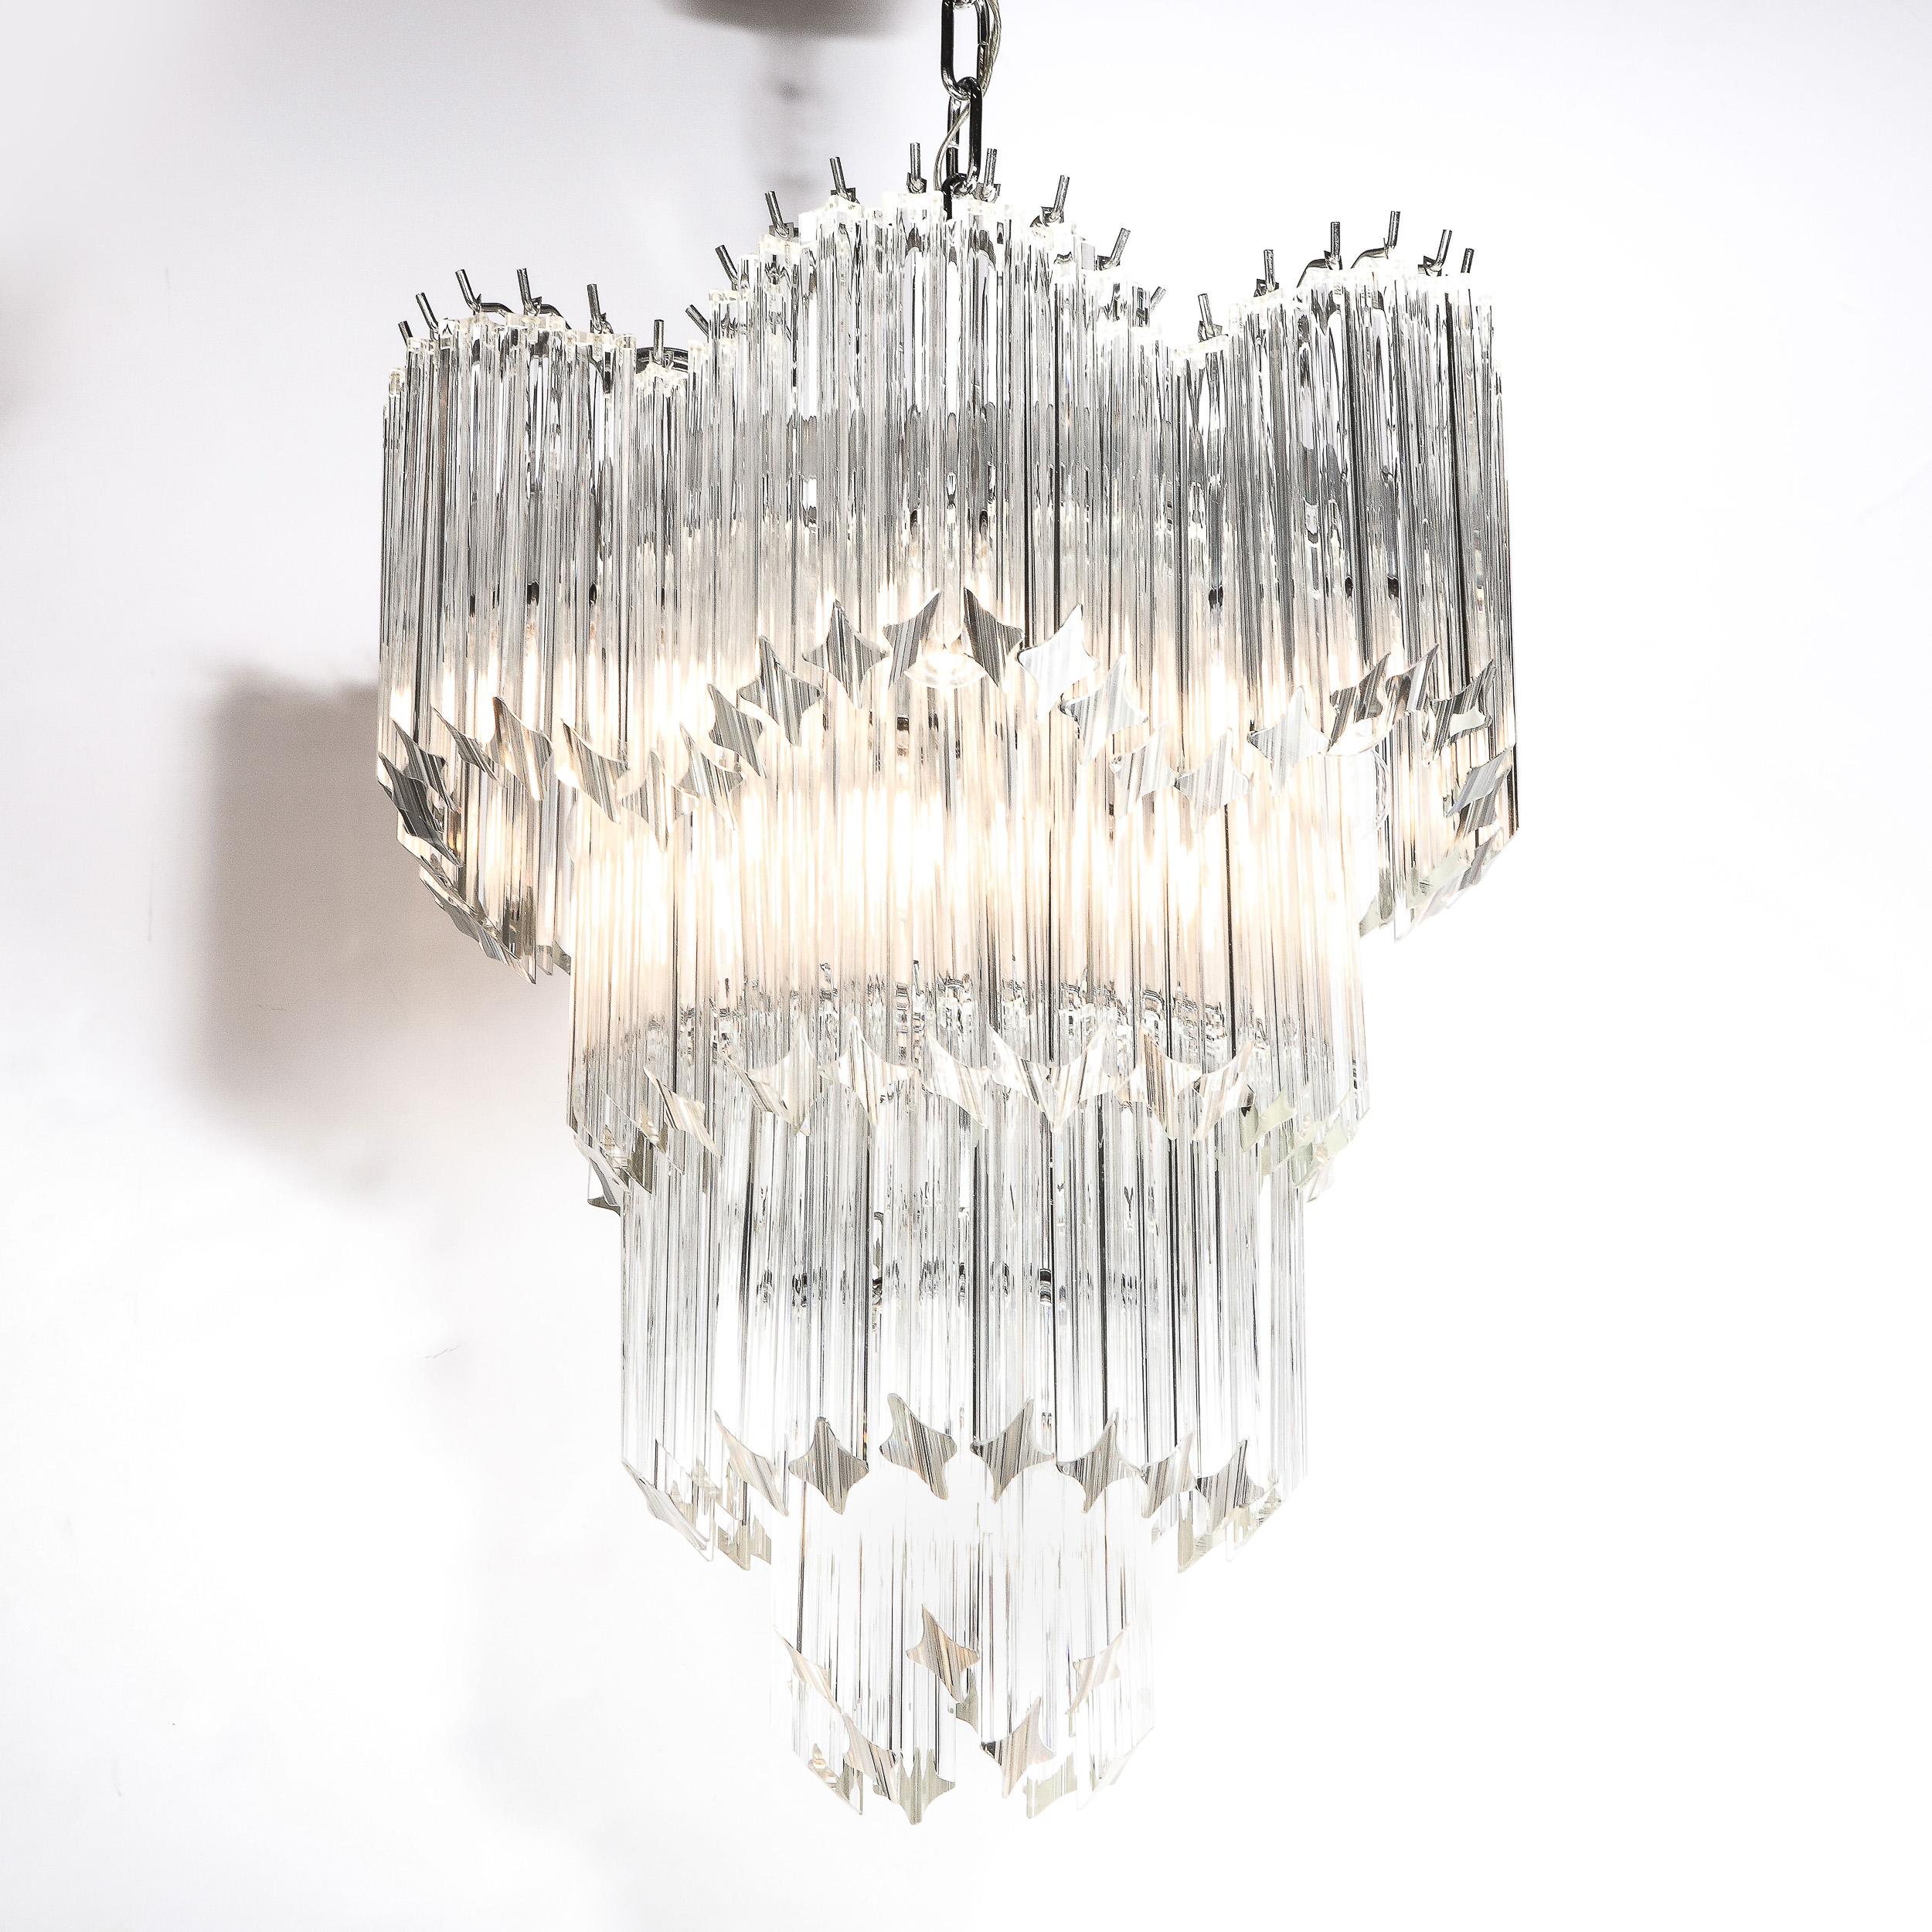 Italian Mid-Century Modernist Scalloped Four-Tier Cut Triedre Crystal Camer Chandelier For Sale